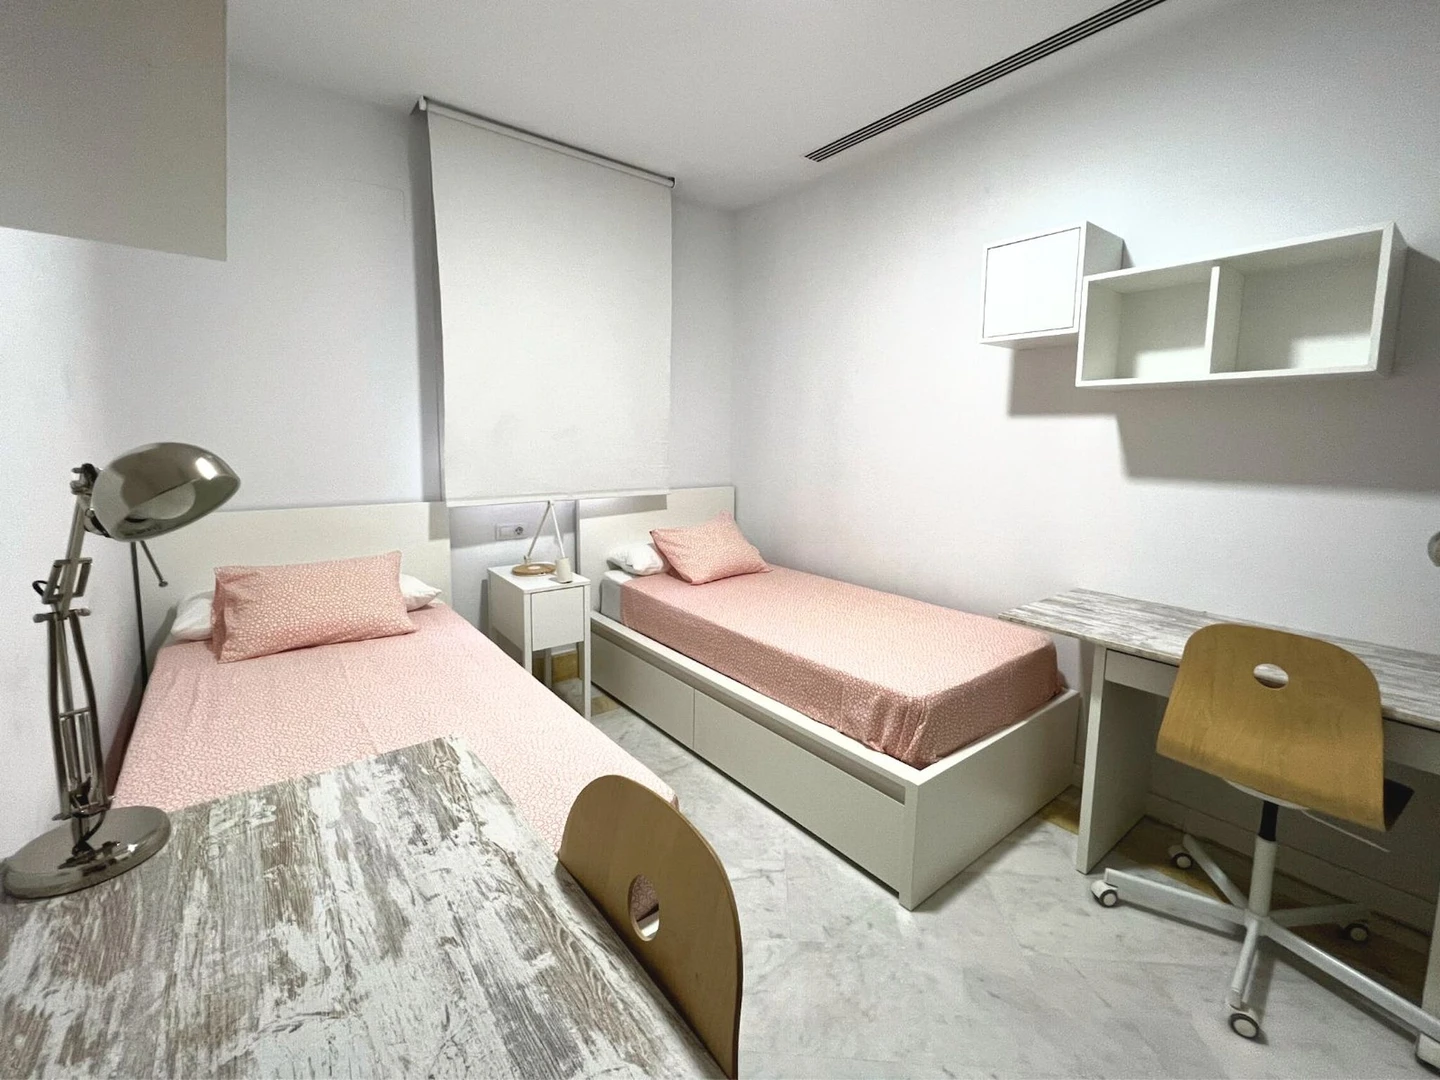 Shared room in 3-bedroom flat Dos Hermanas